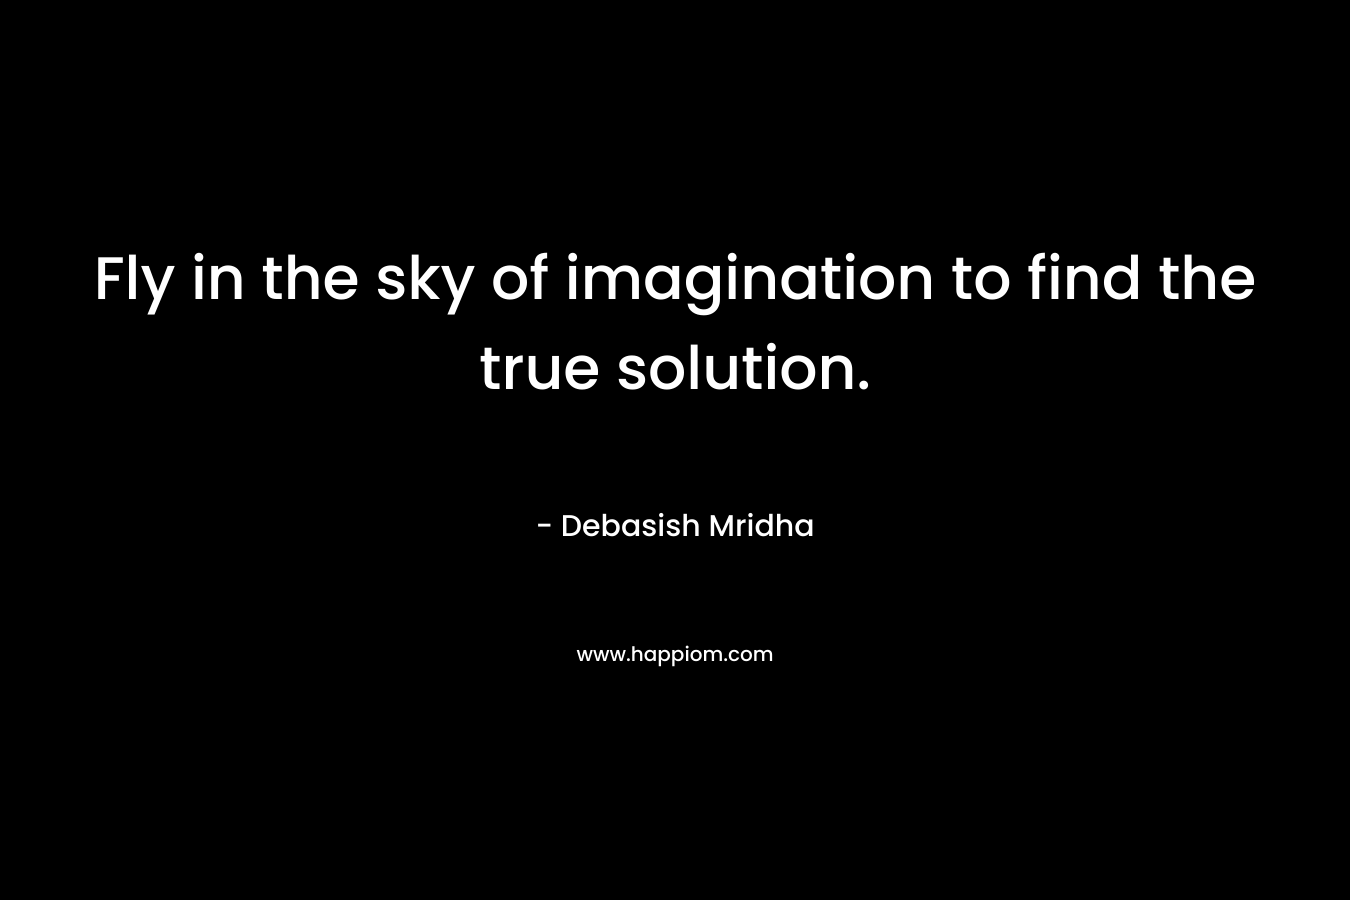 Fly in the sky of imagination to find the true solution.